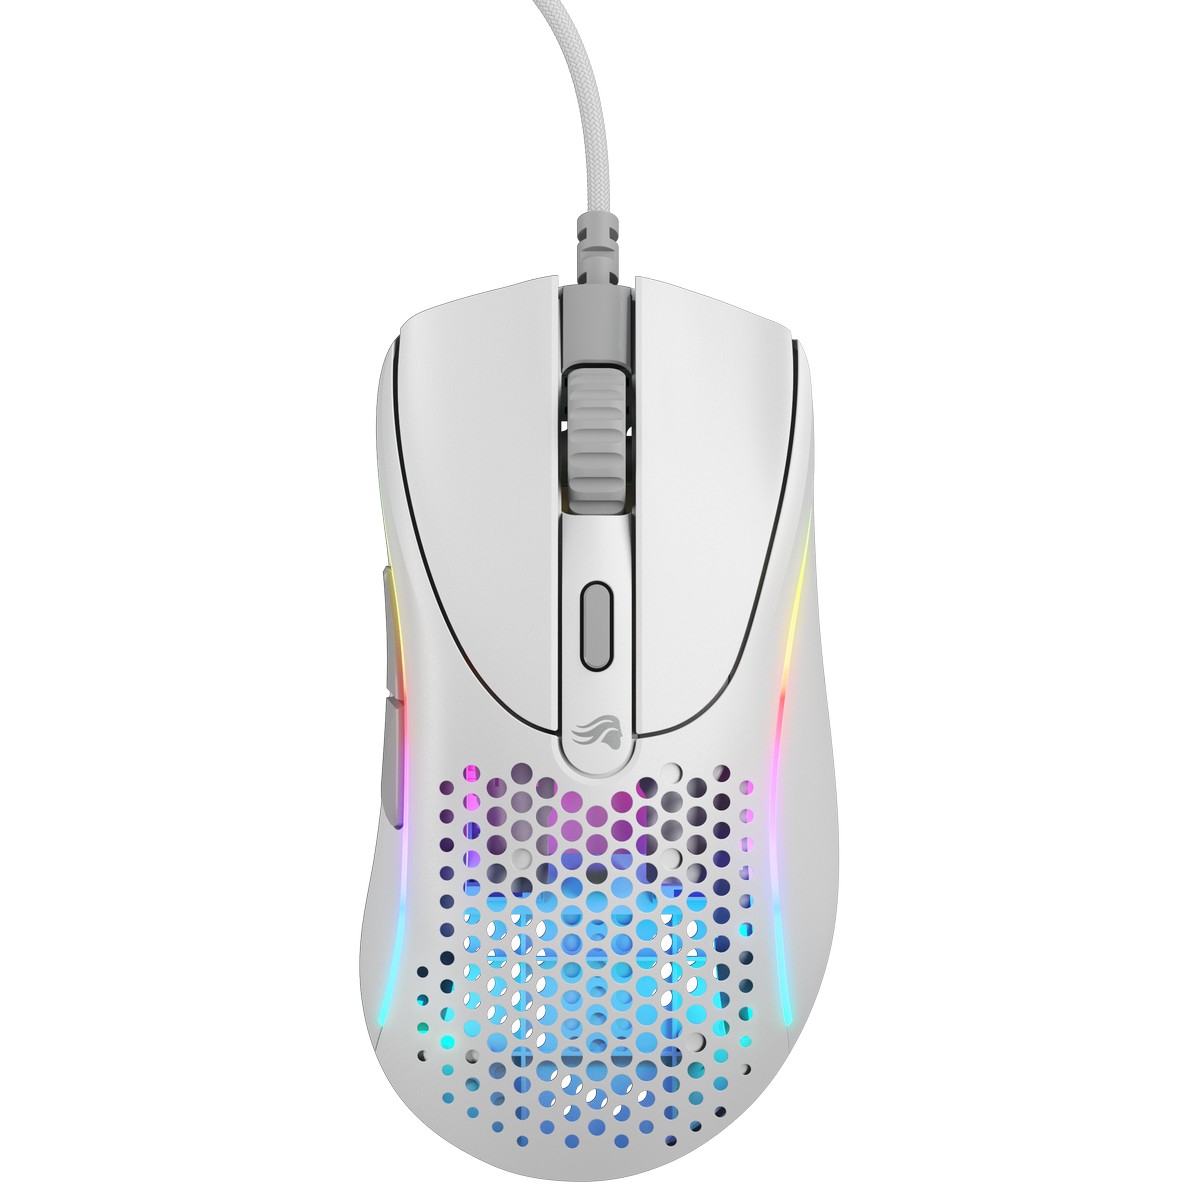 Glorious Model D 2 Wired Optical RGB Lightweight Gaming Mouse - Matte White